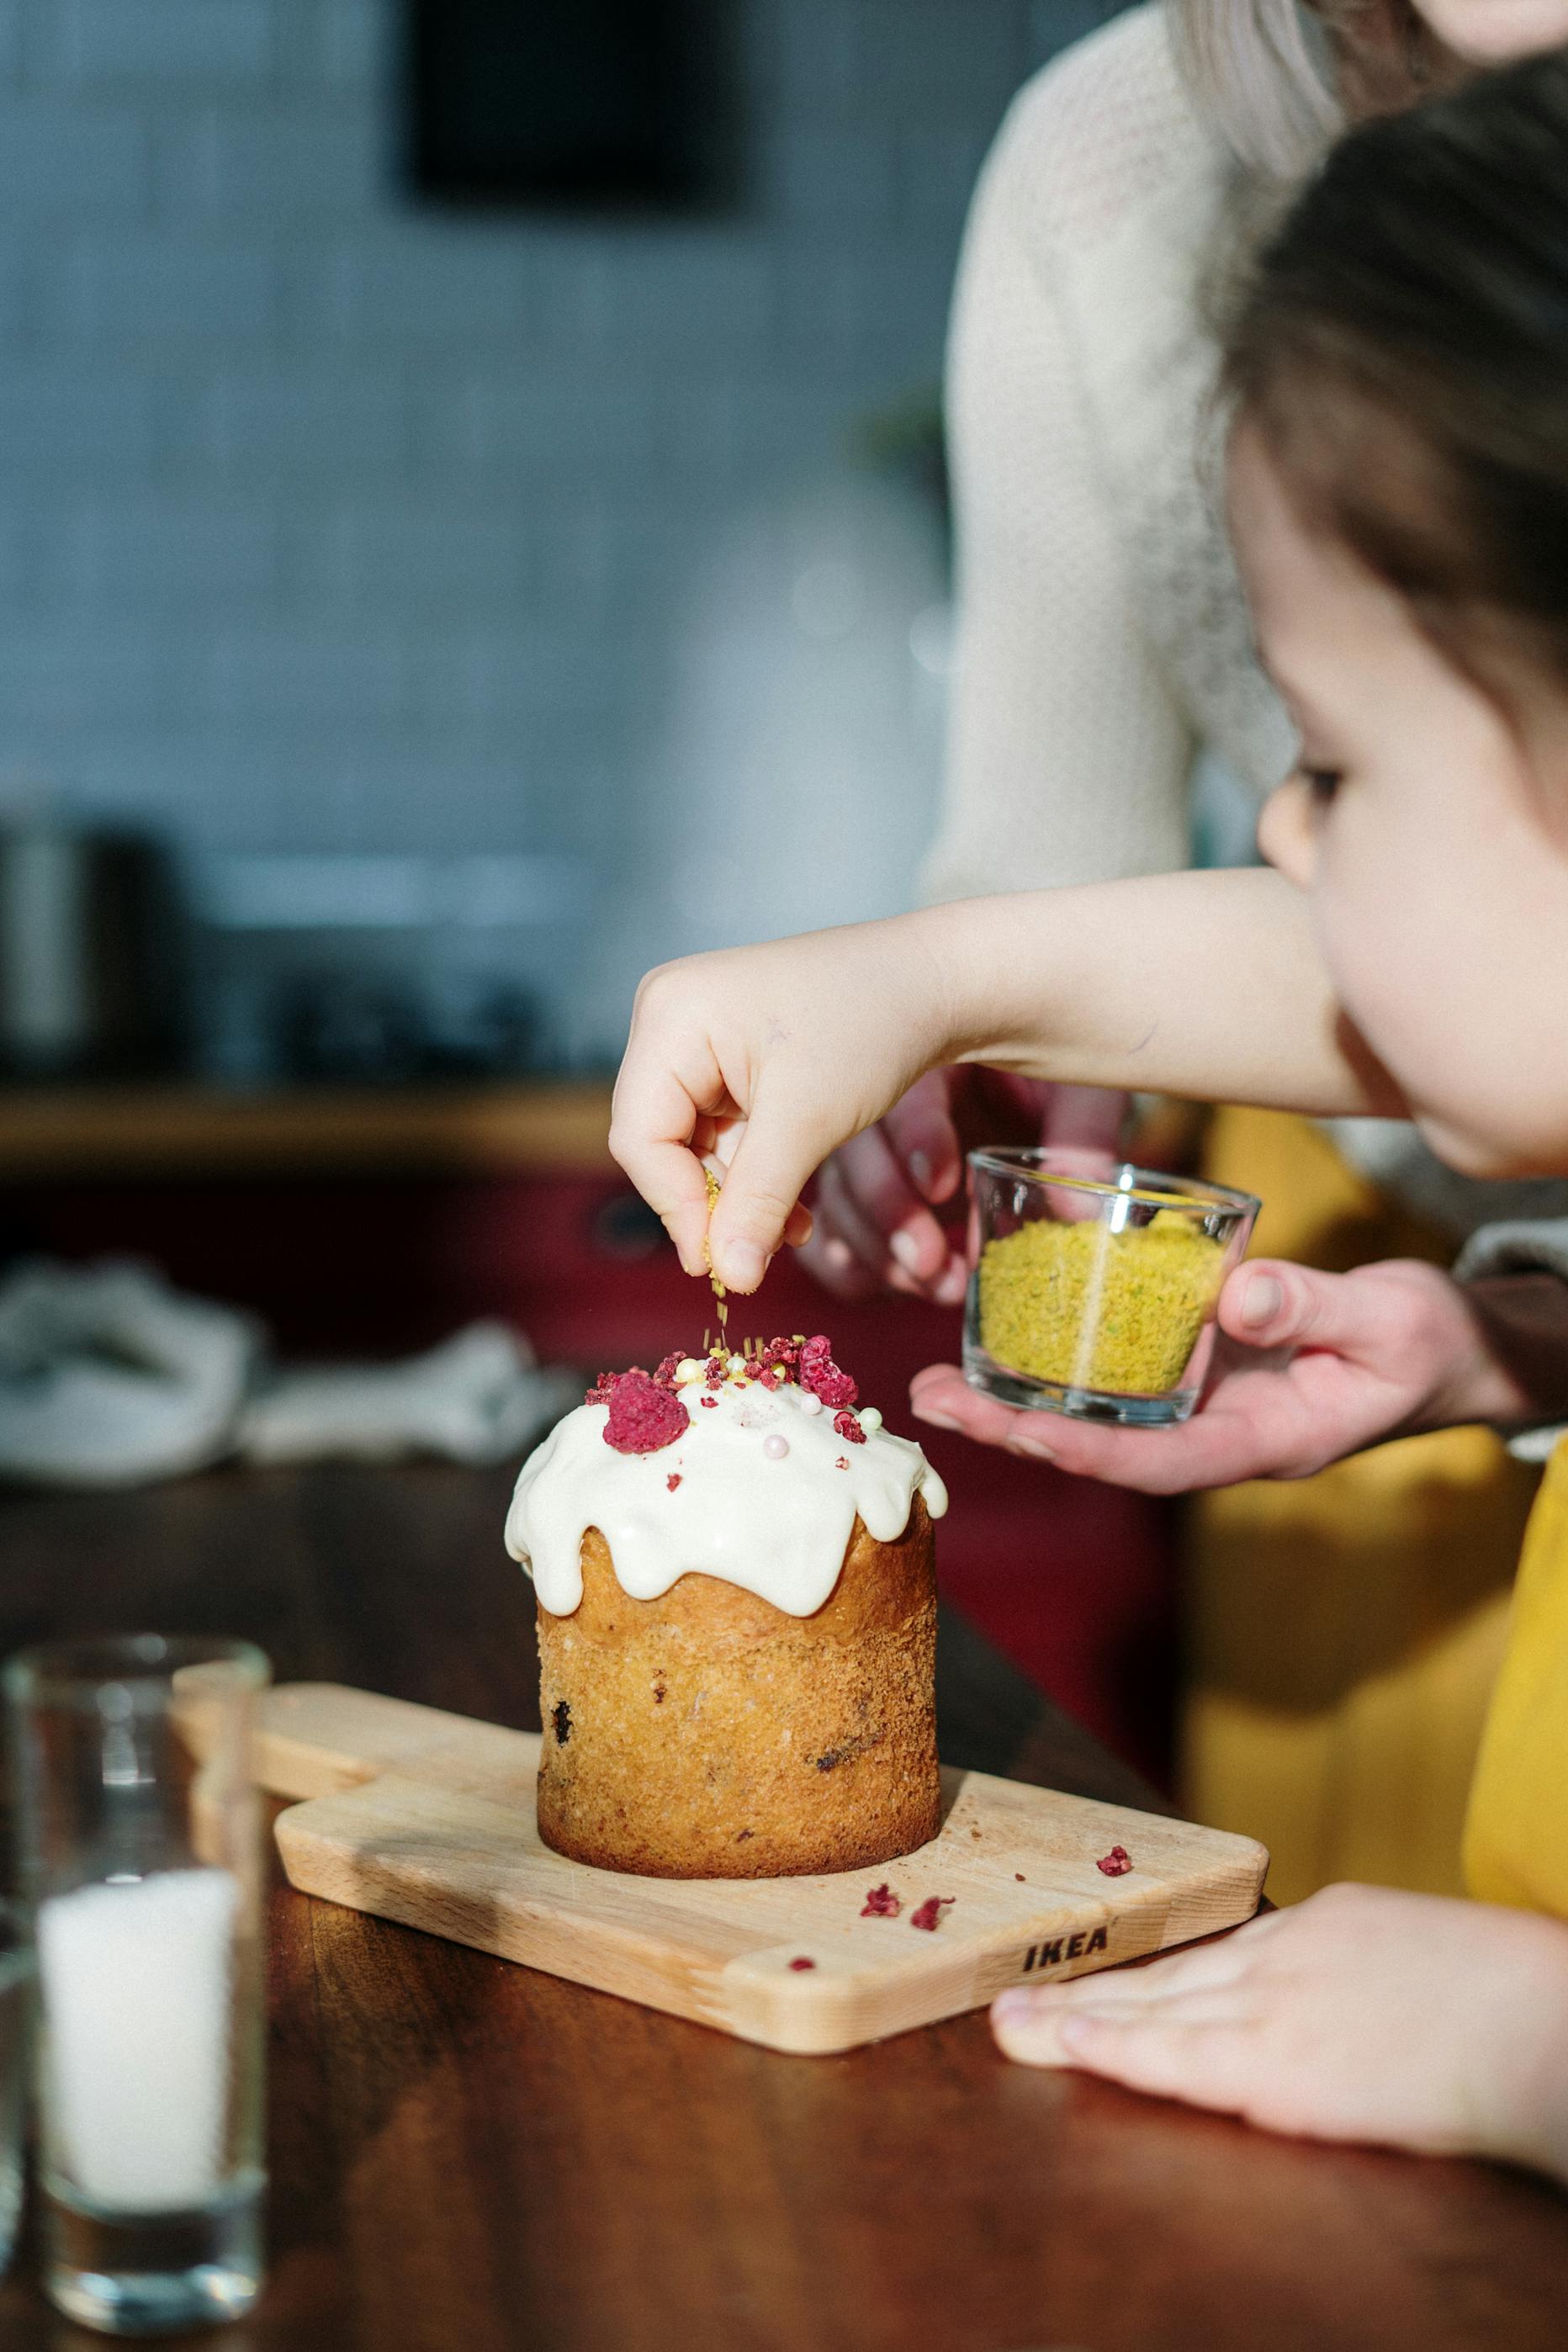 A little girl decorating a cake | Source: Pexels